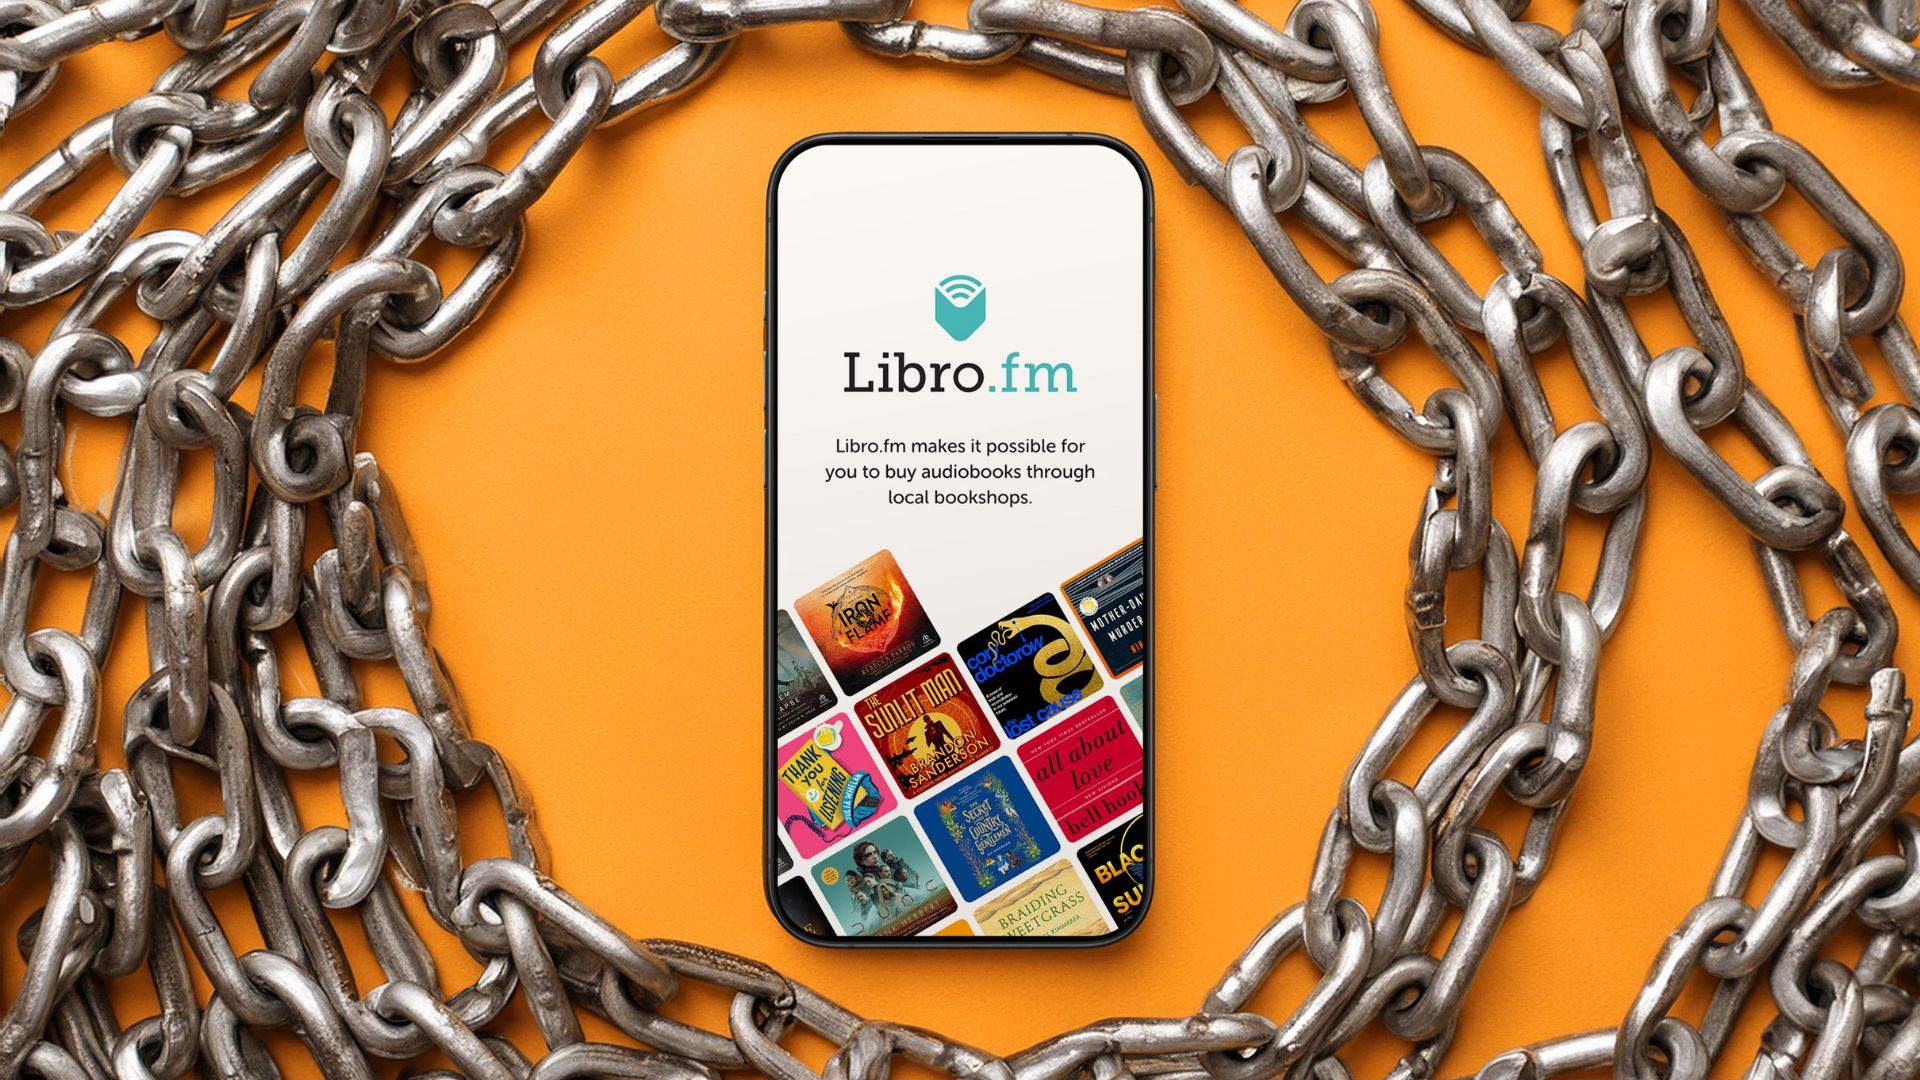 Libro.fm on an iPhone surrounded by chains